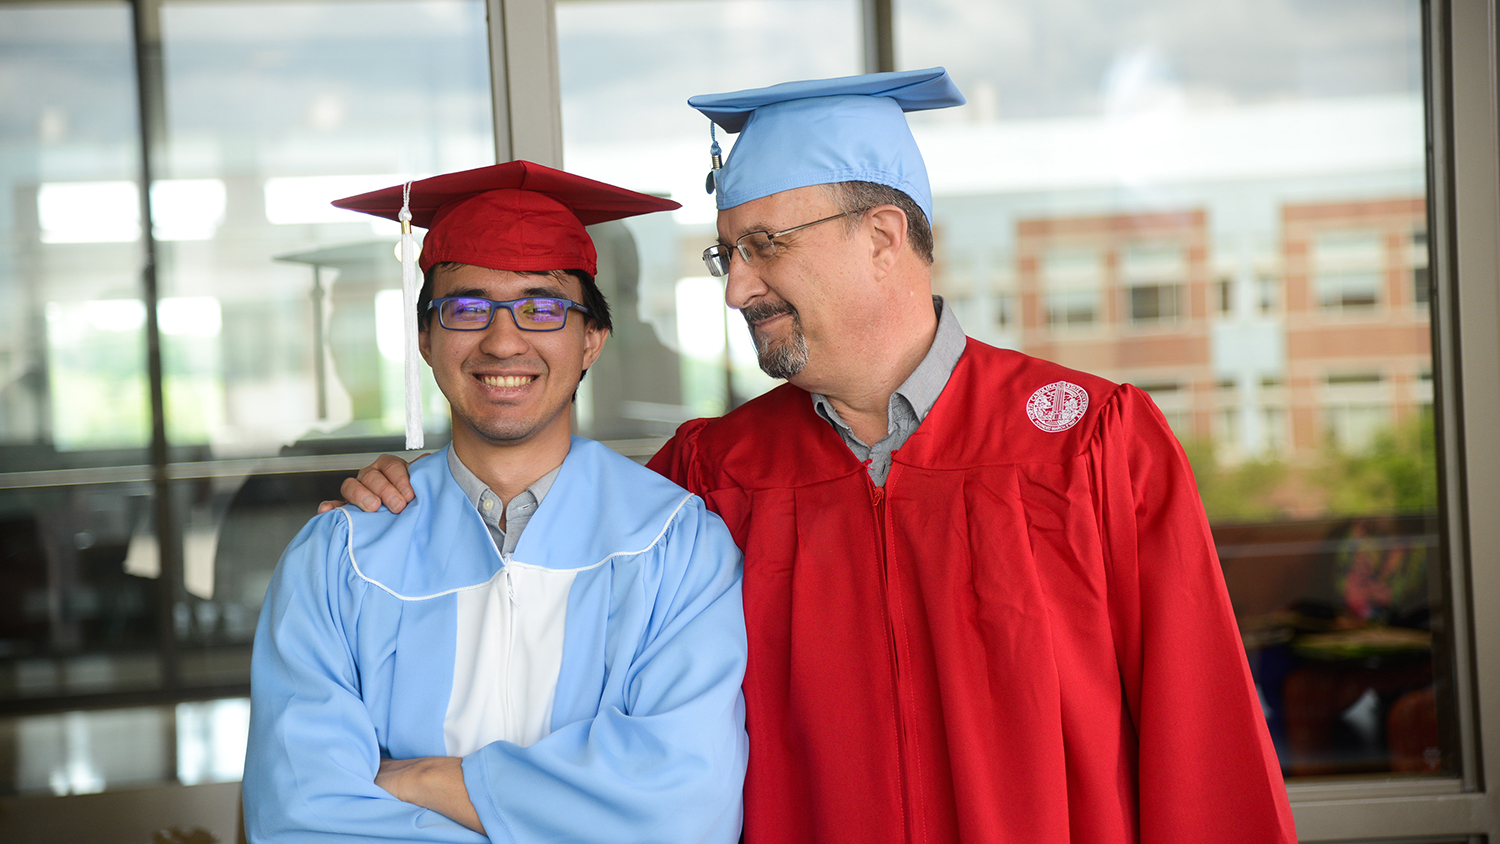 Timothy and David Calhoun smile in cap and gown